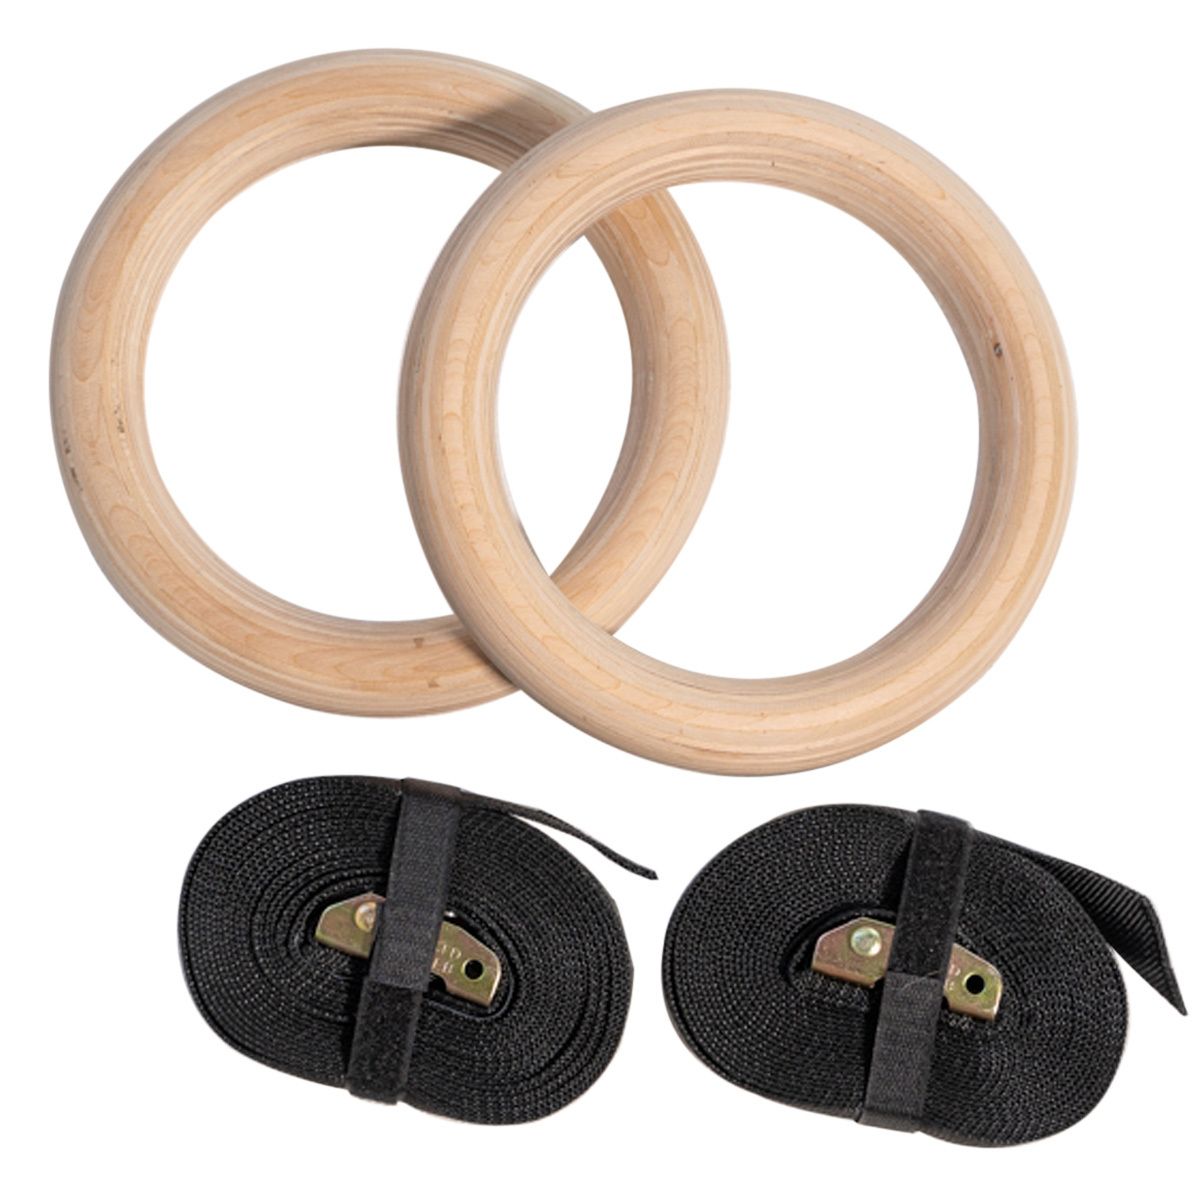 Armortech Wooden Gym Rings 